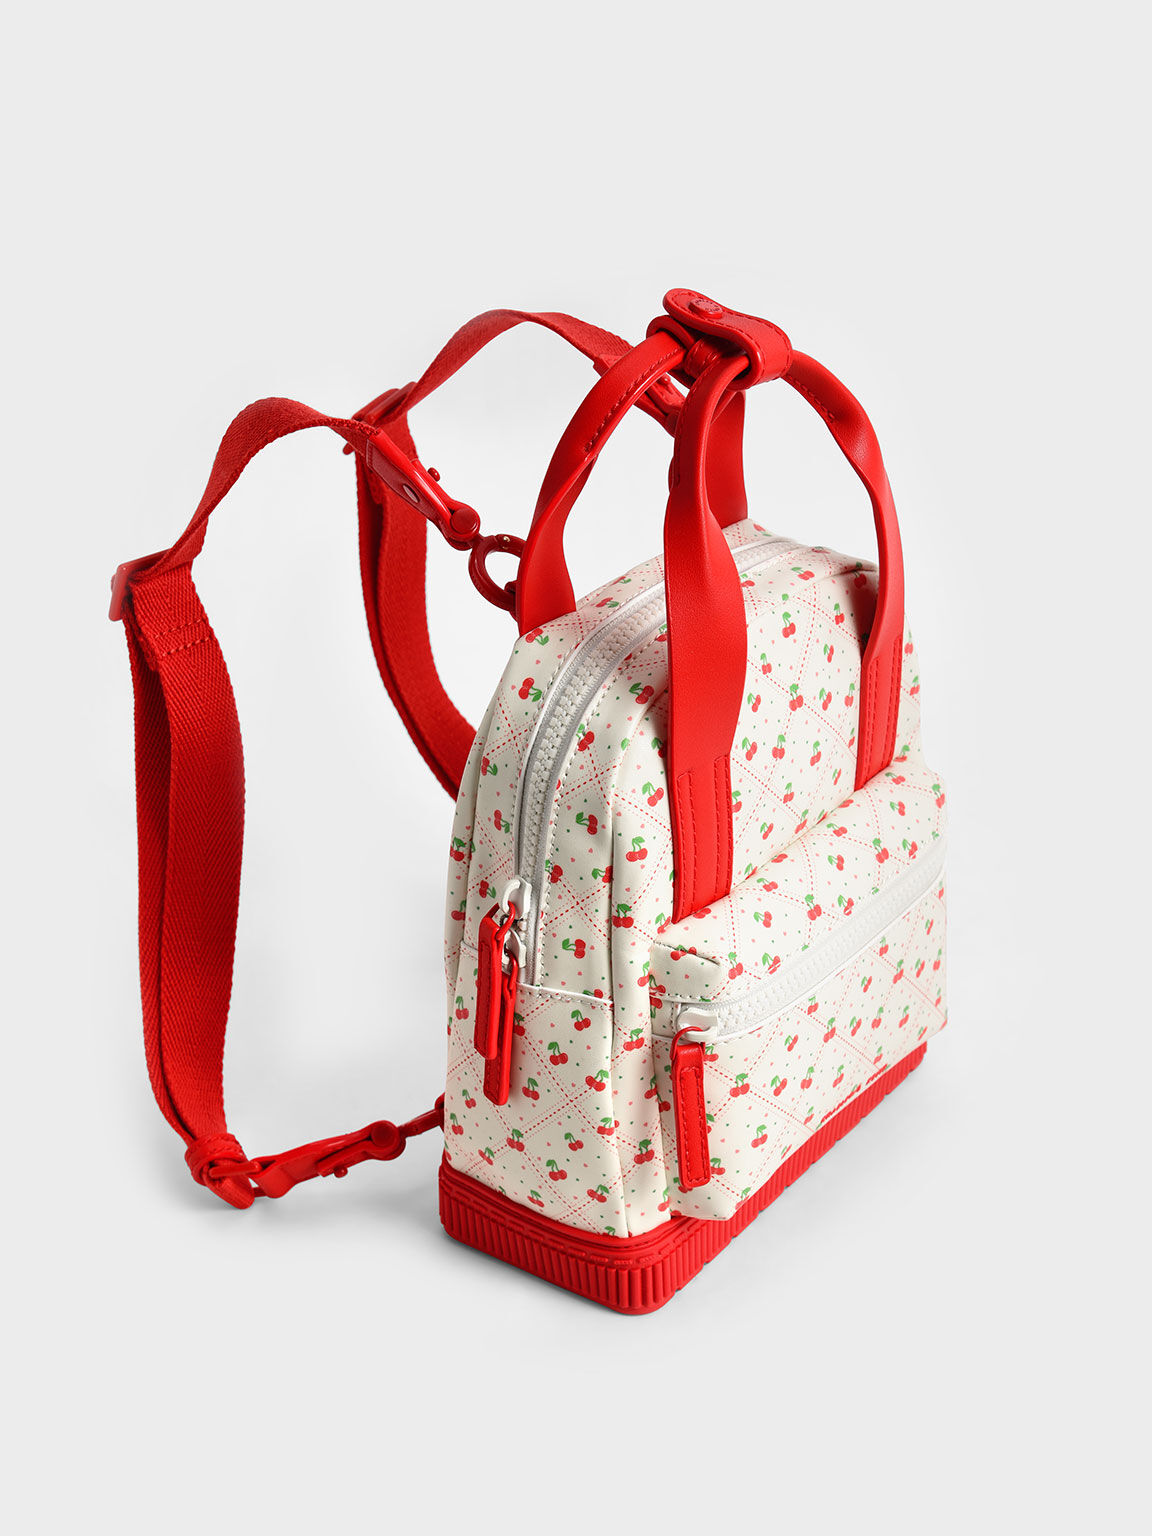 Girls' Cherry-Print Double Top Handle Backpack, Red, hi-res